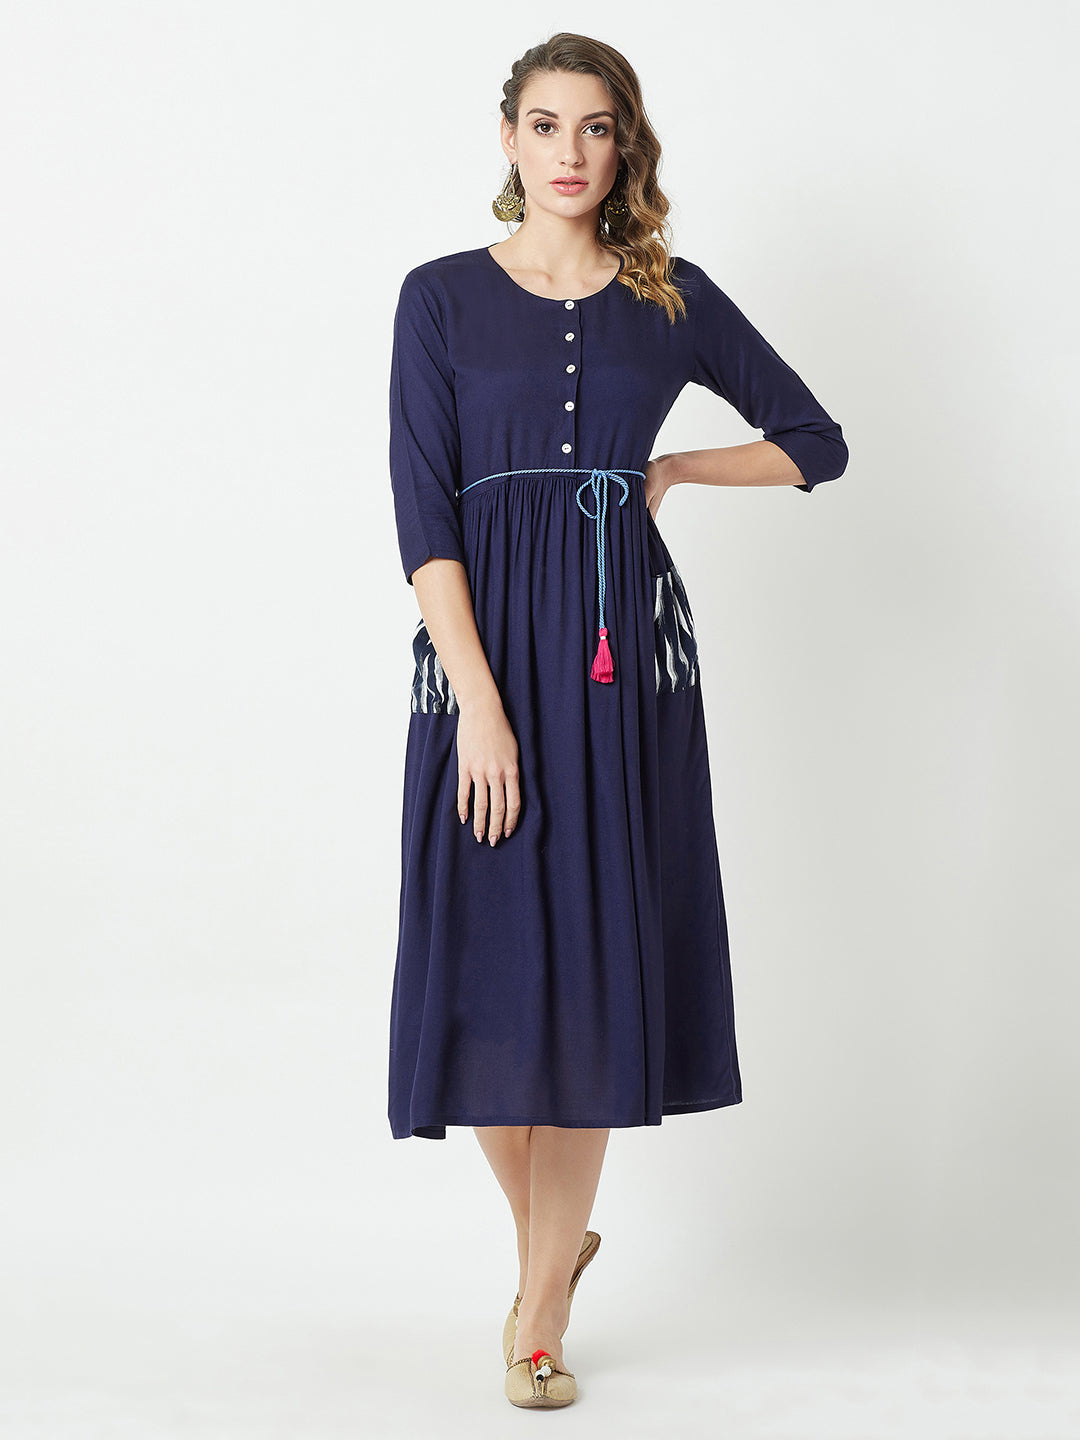 Women's Navy Blue Round Neck 3/4 Sleeve Belted Solid Gathered Midi Dress